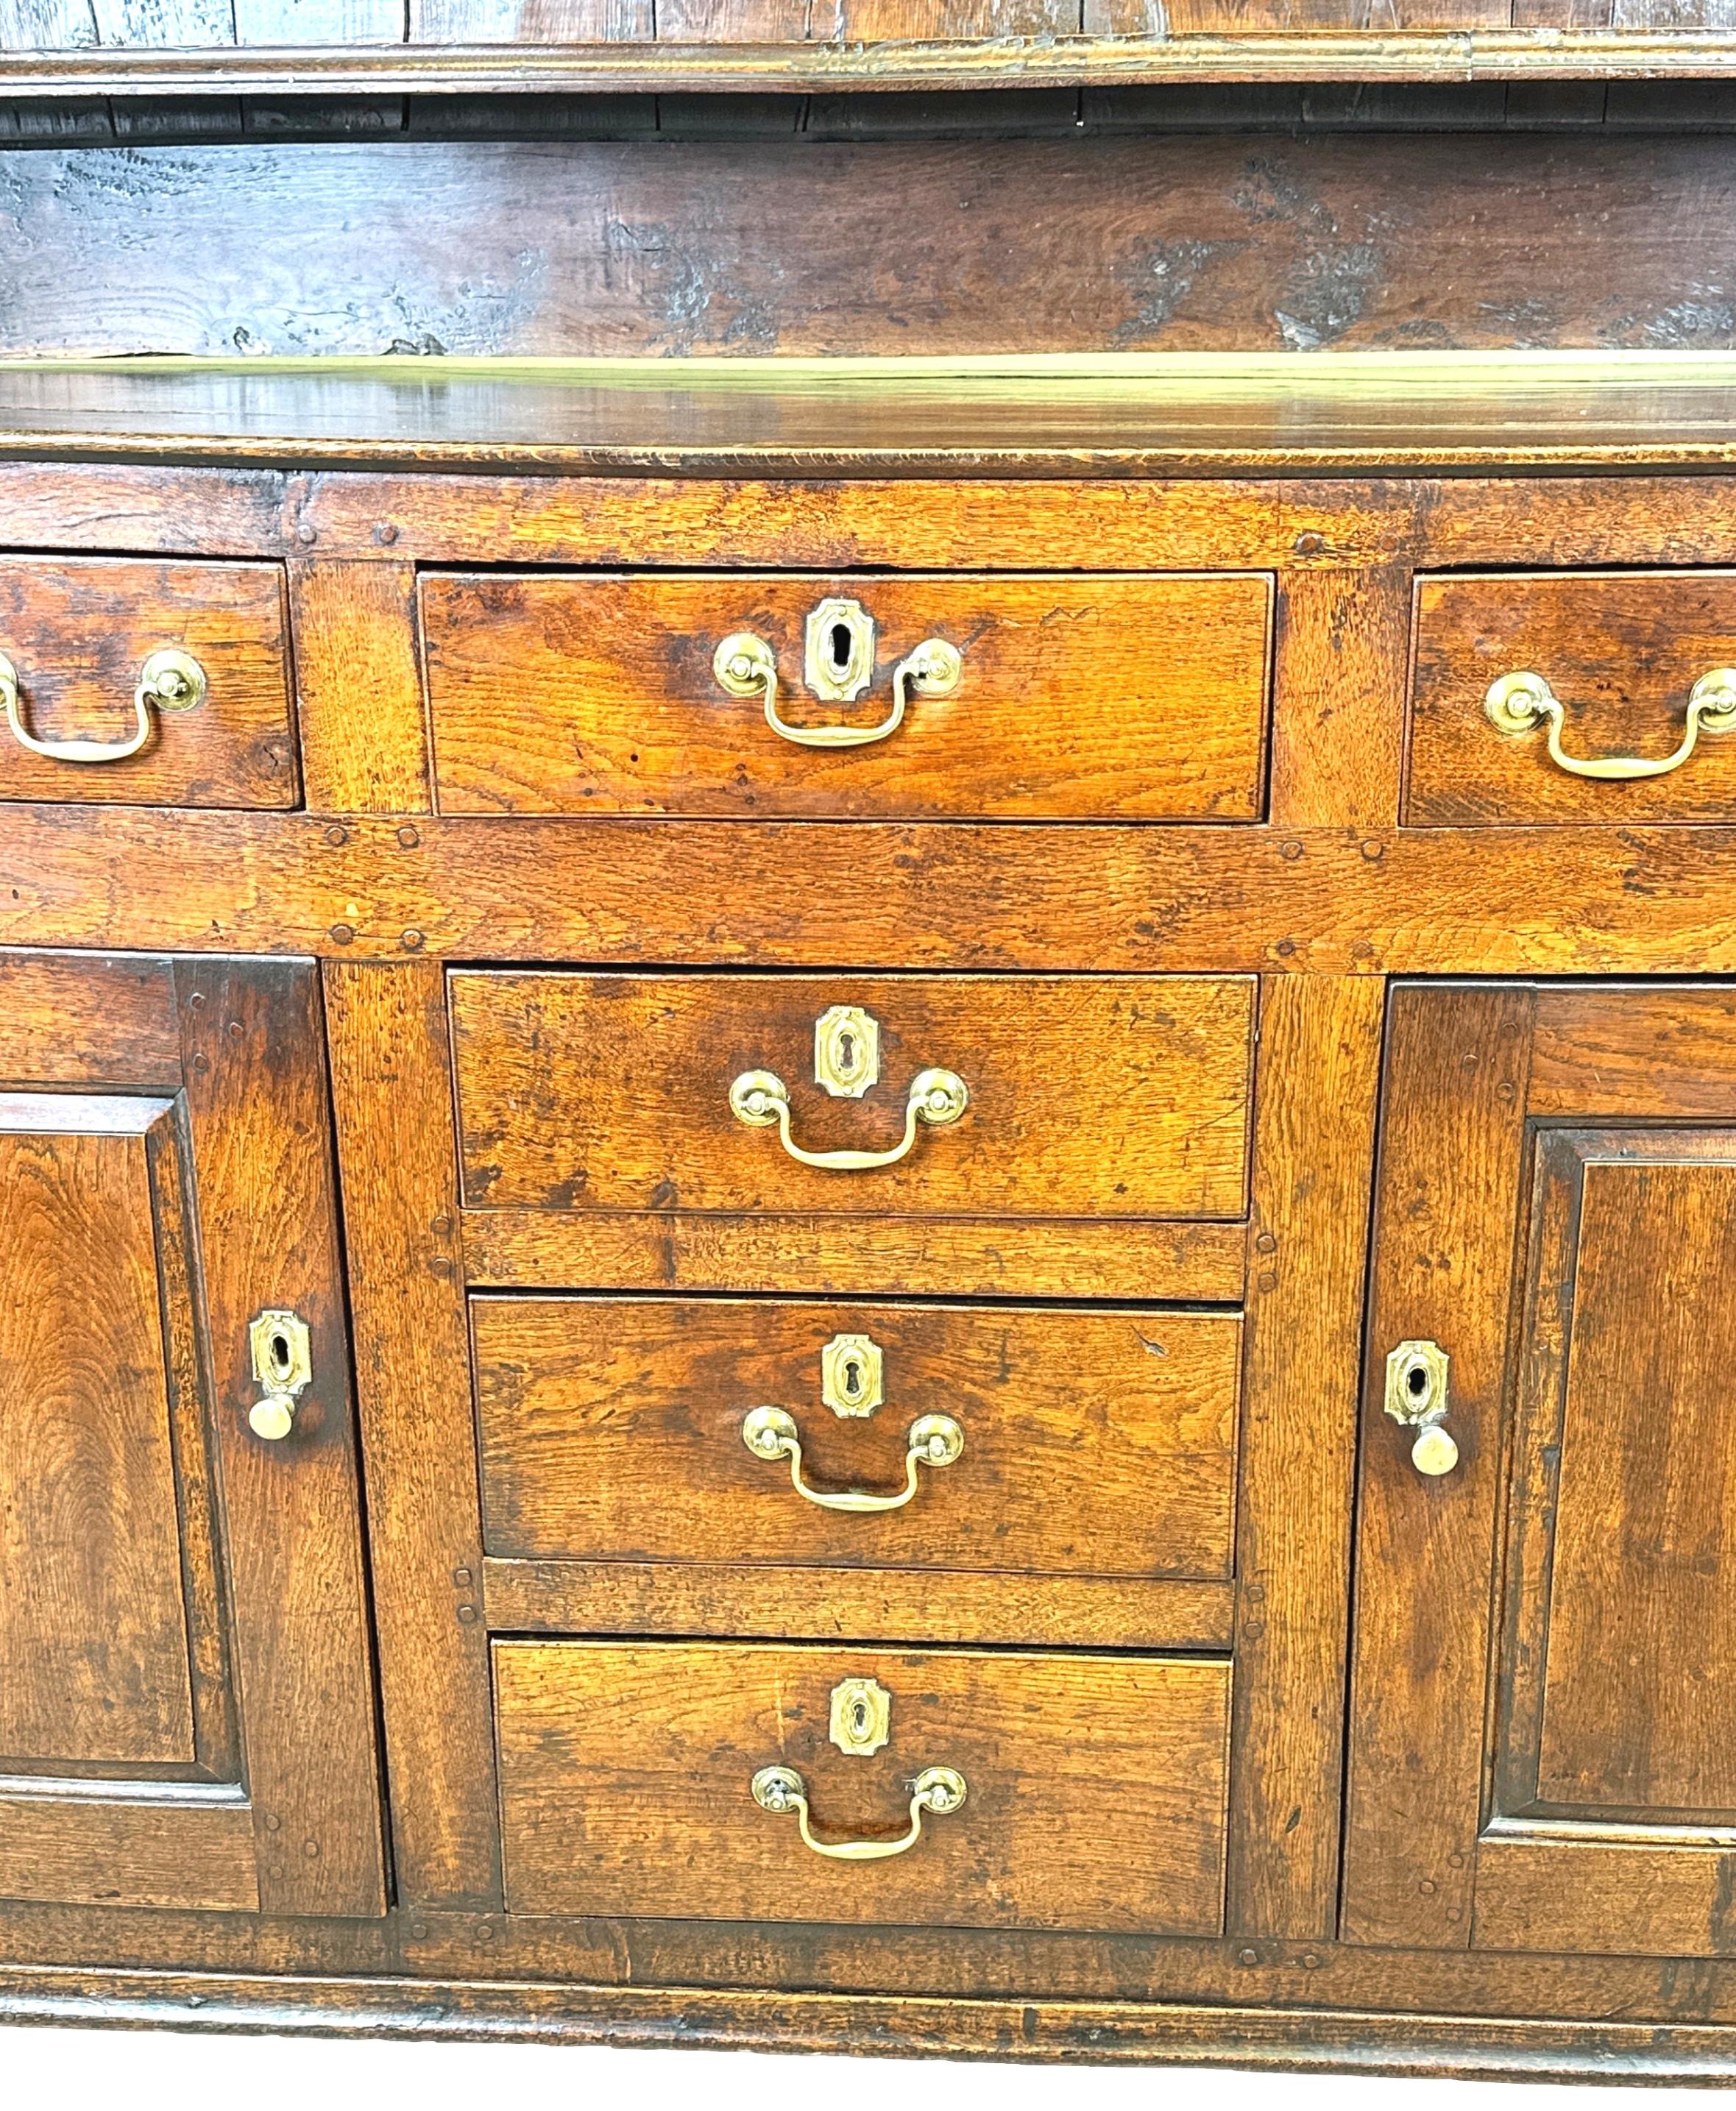 A Charming Mid 18th Century Georgian Oak Dresser, Of Superbly Untouched Rich Colour And Patina, Having Original Rack With Three Fixed Shelves And Panelled Back Flanked By Elegant Shaped Ends, Over Base With Six Drawers Retaining Original Brass Swan